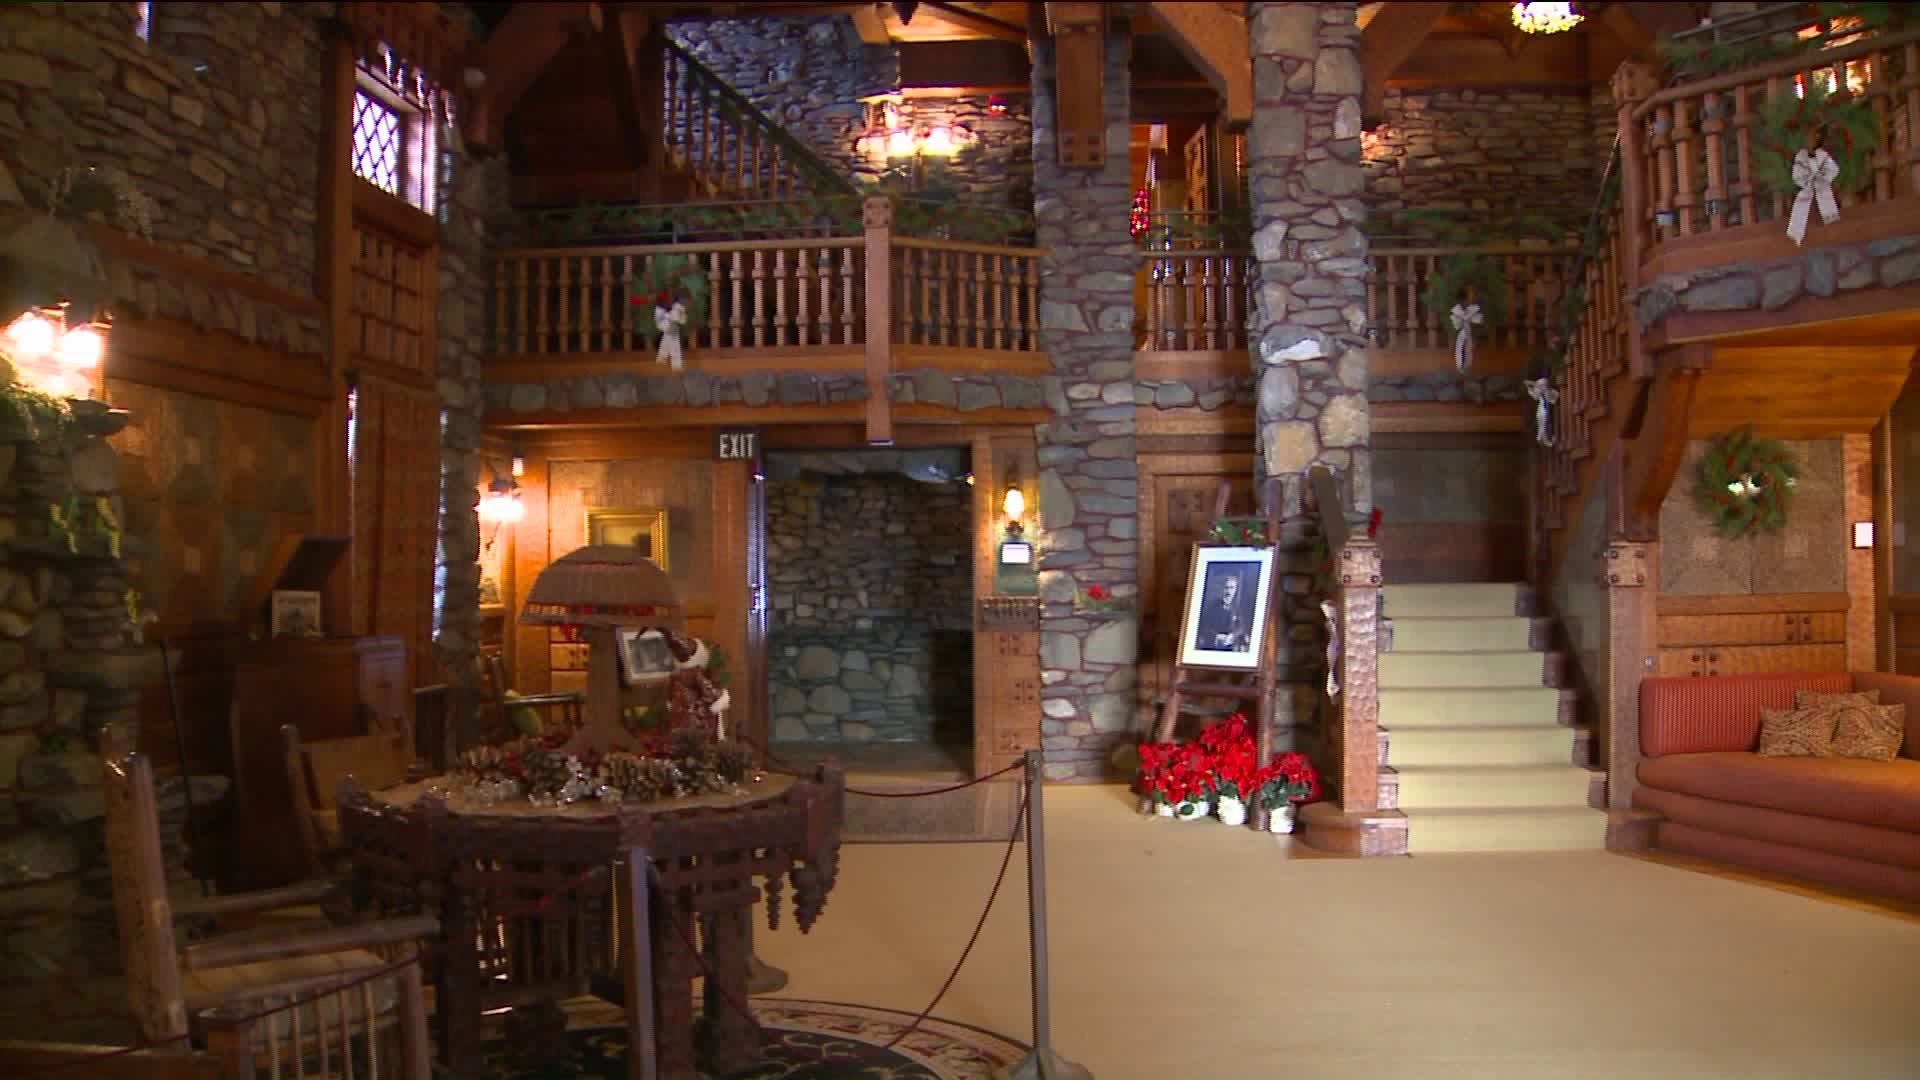 Daytrippers: Decking the halls at Gillette Castle for Christmas